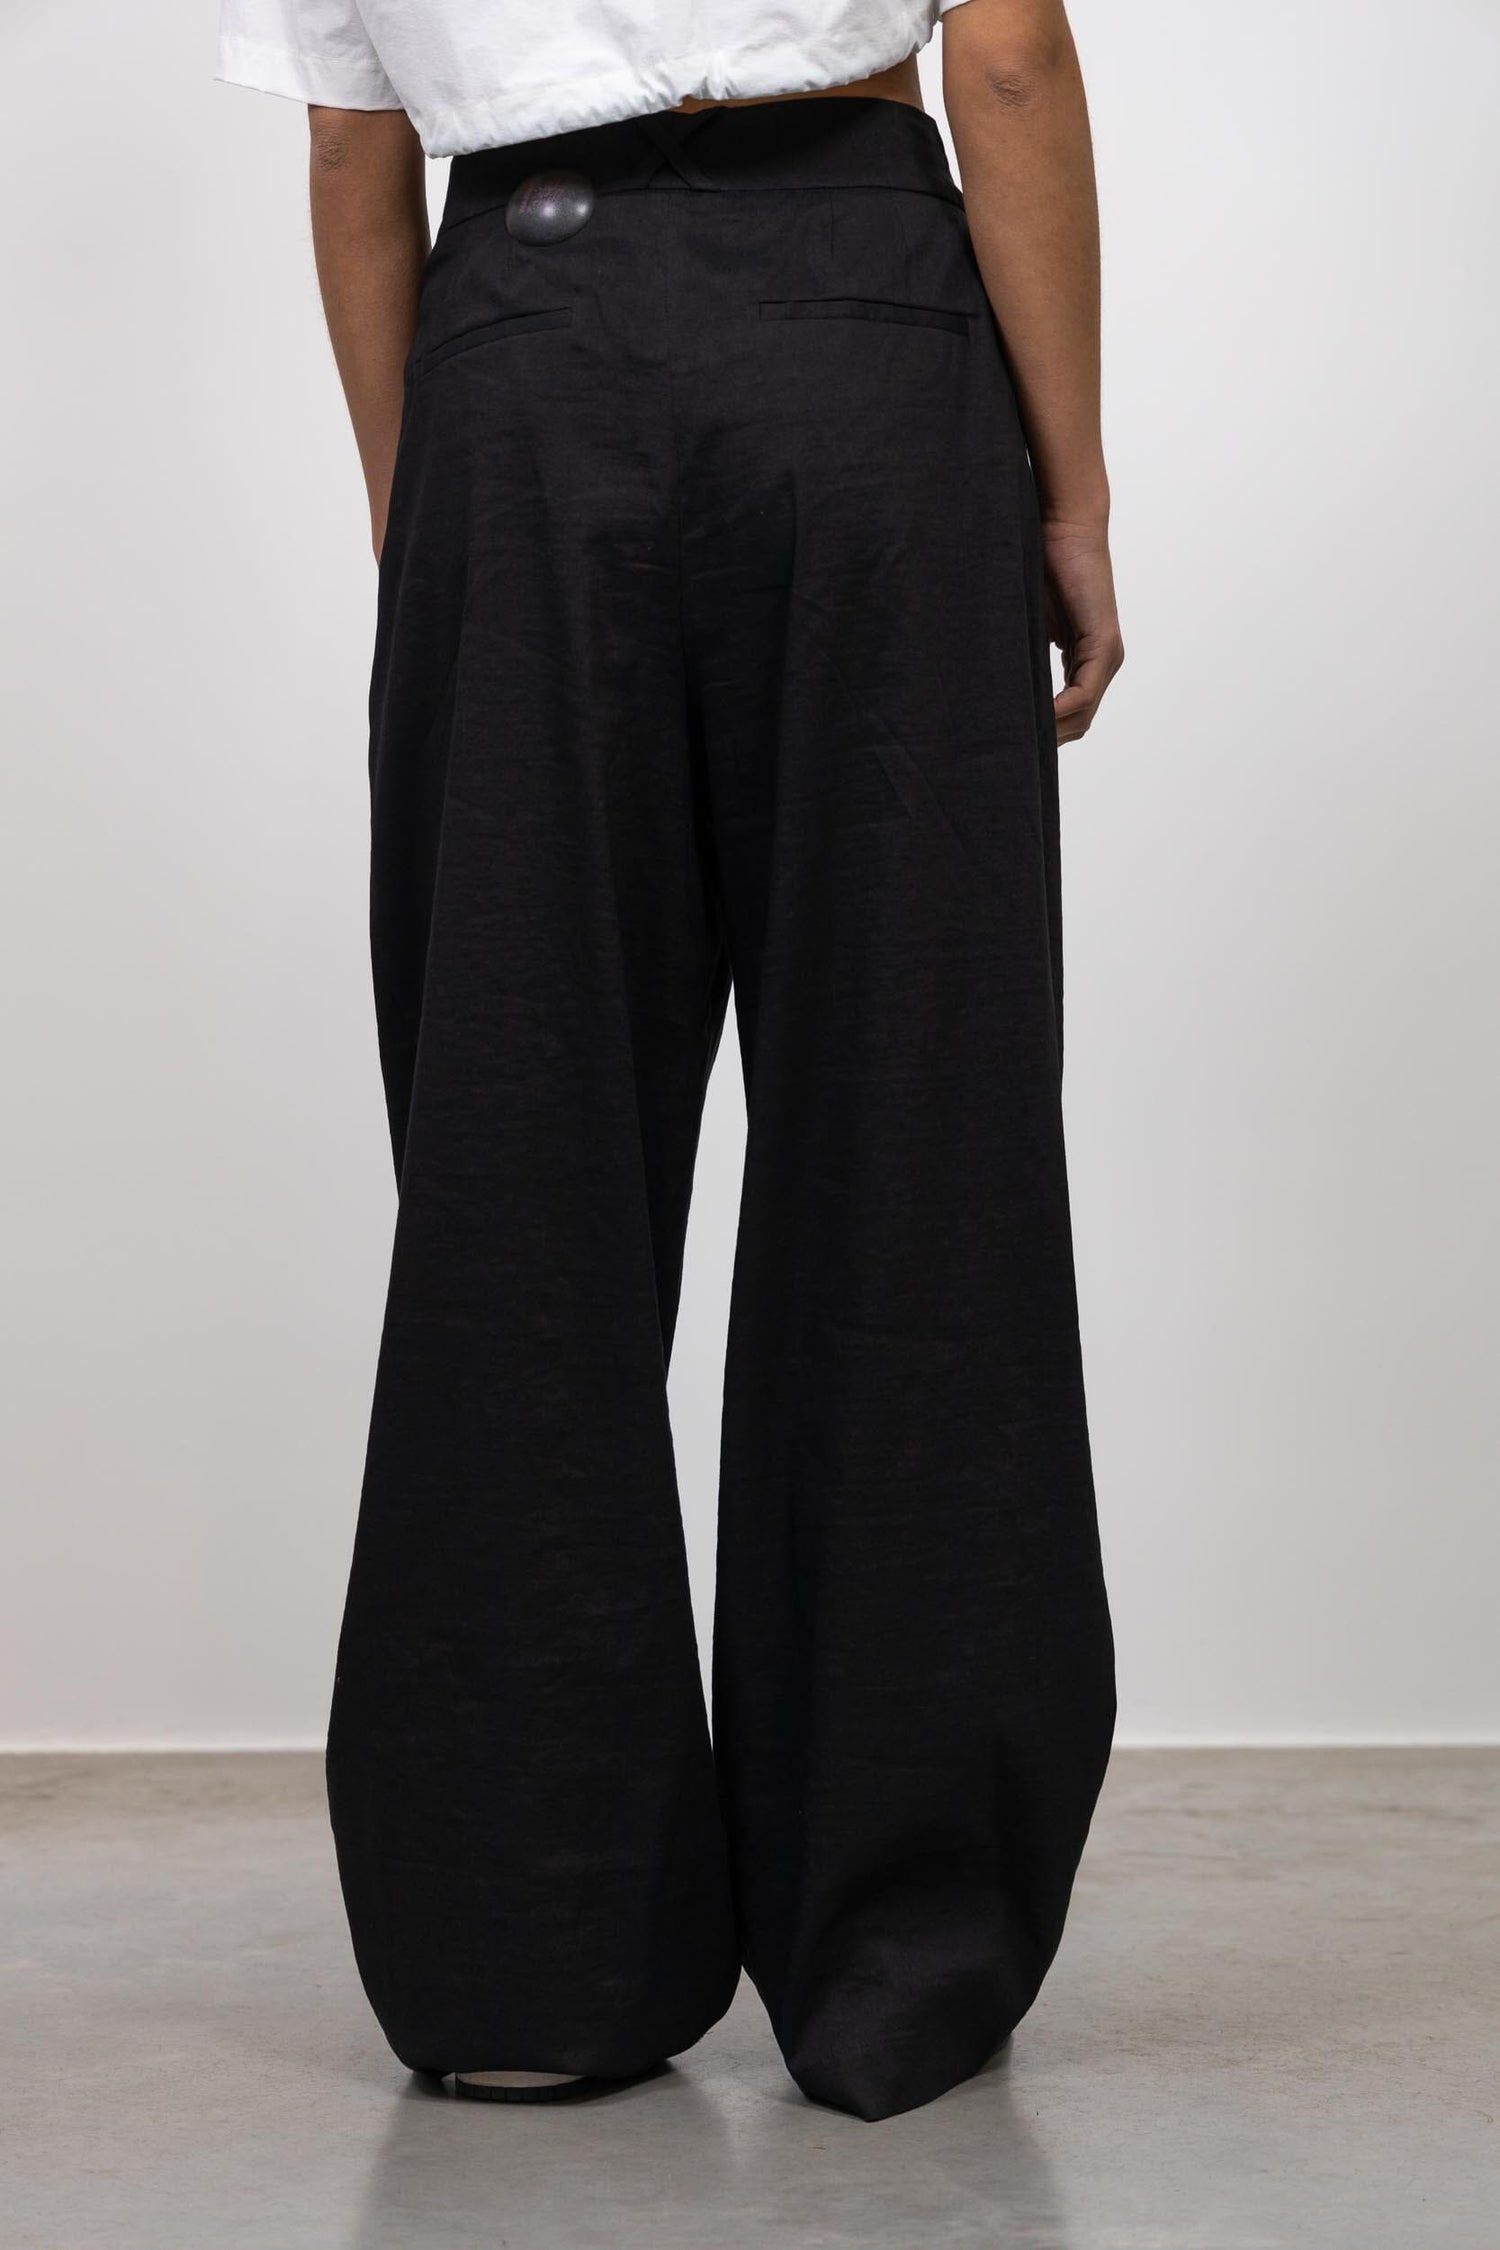 Dunnes Stores  Black Carolyn Donnelly The Edit Black Tailored Linen  Trousers